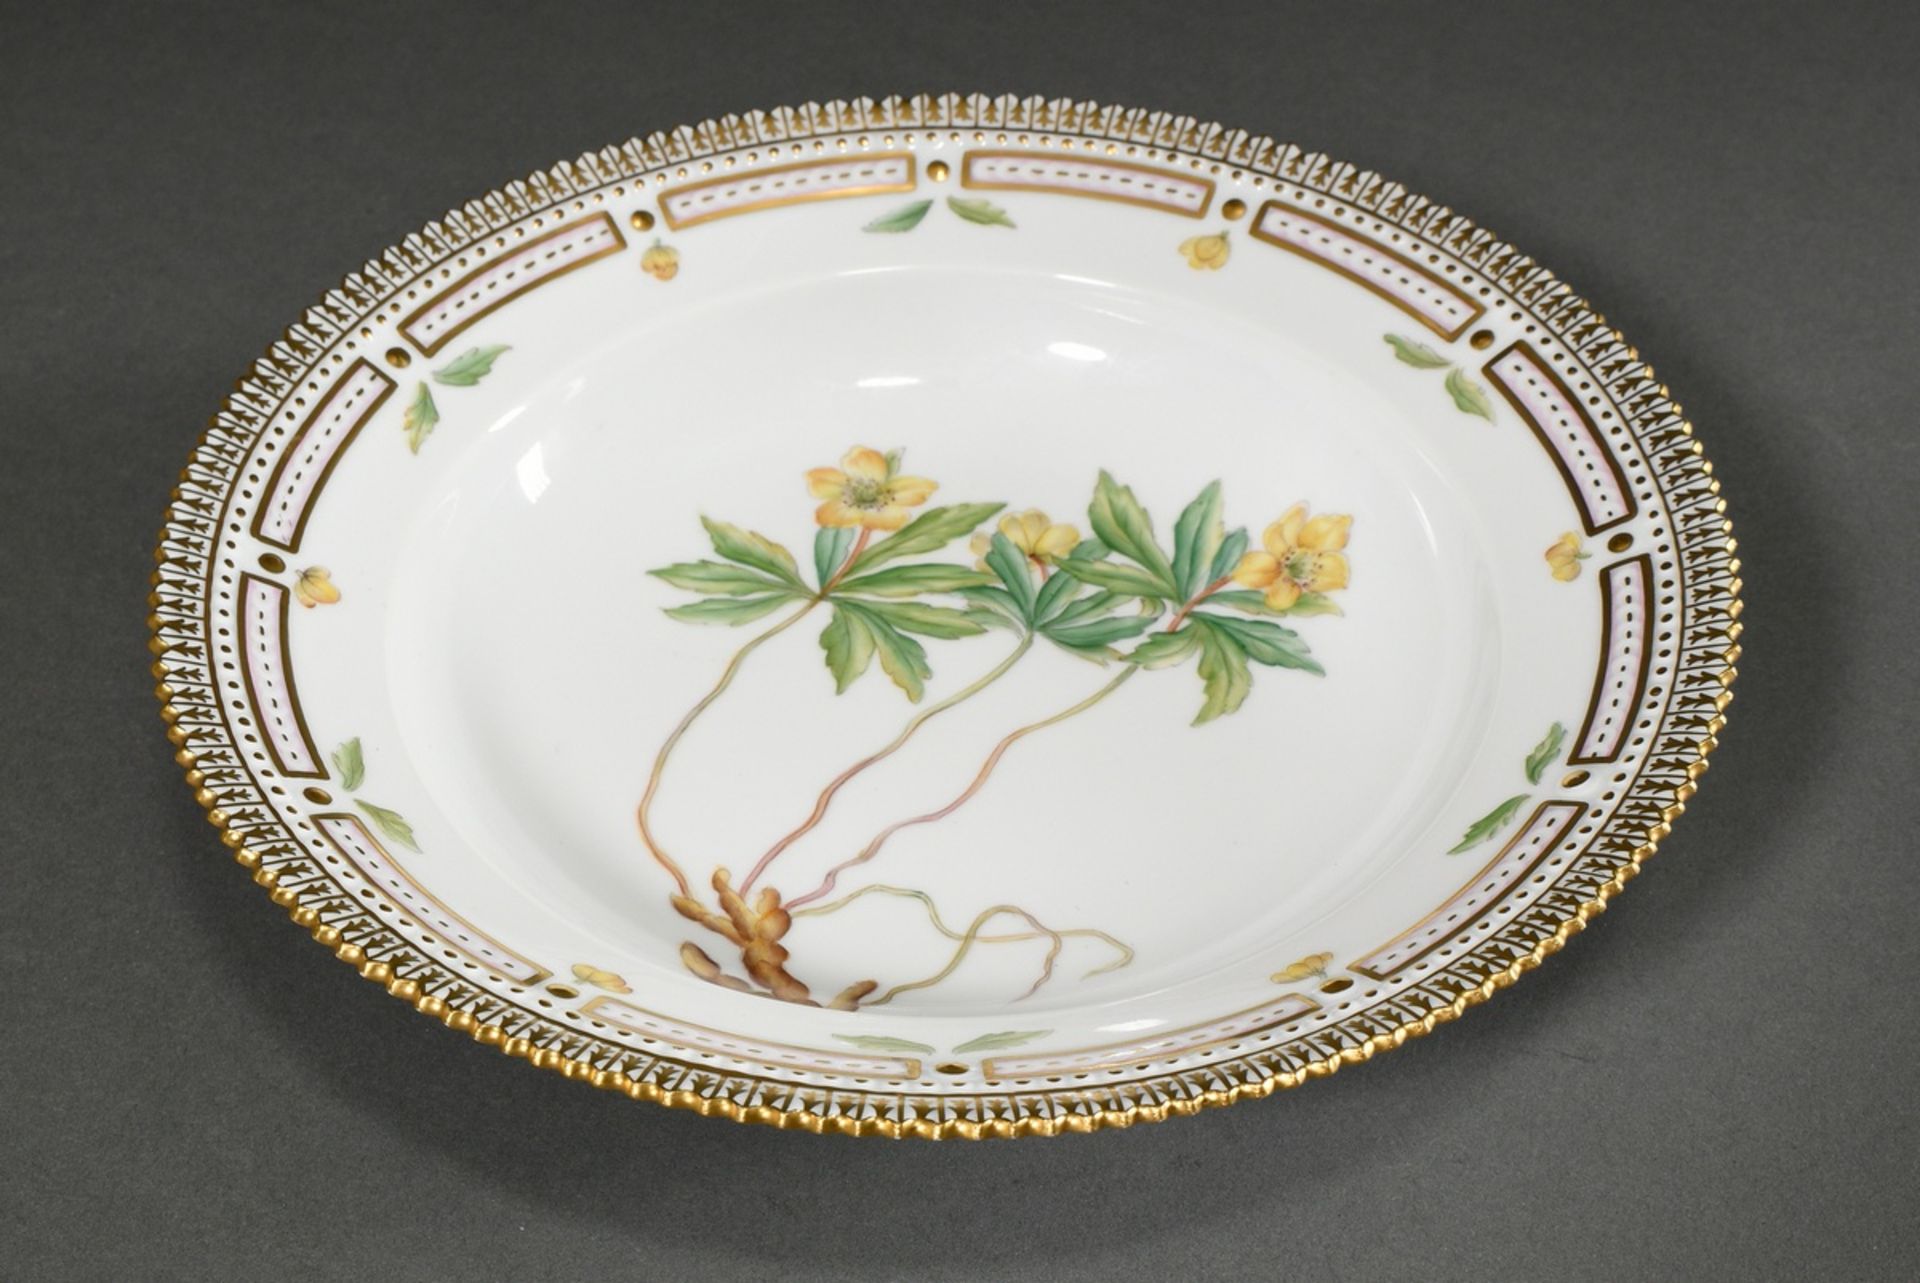 Royal Copenhagen "Flora Danica" soup plate with polychrome painting in the mirror, gold staffage an - Image 2 of 6